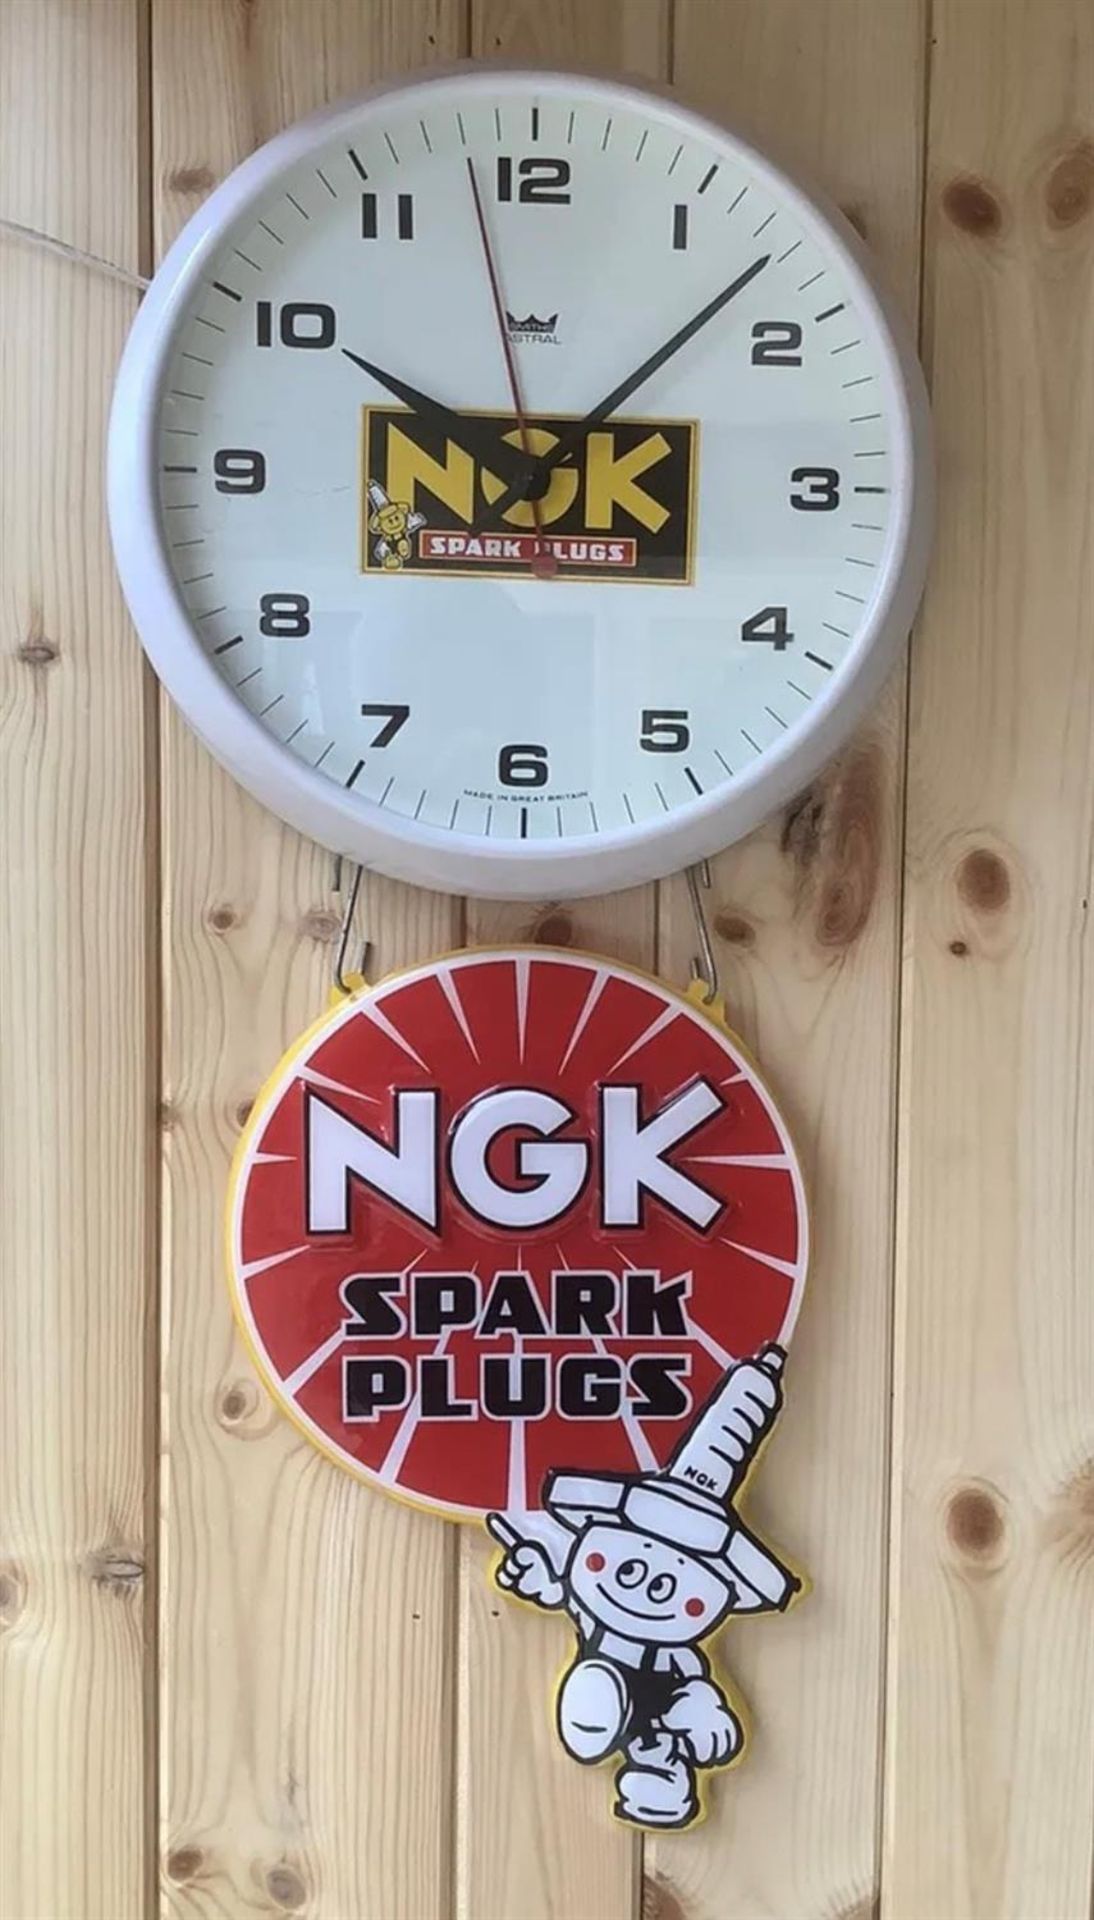 A Rare NGK Spark Plugs 14" Smiths Astral Dial Clock